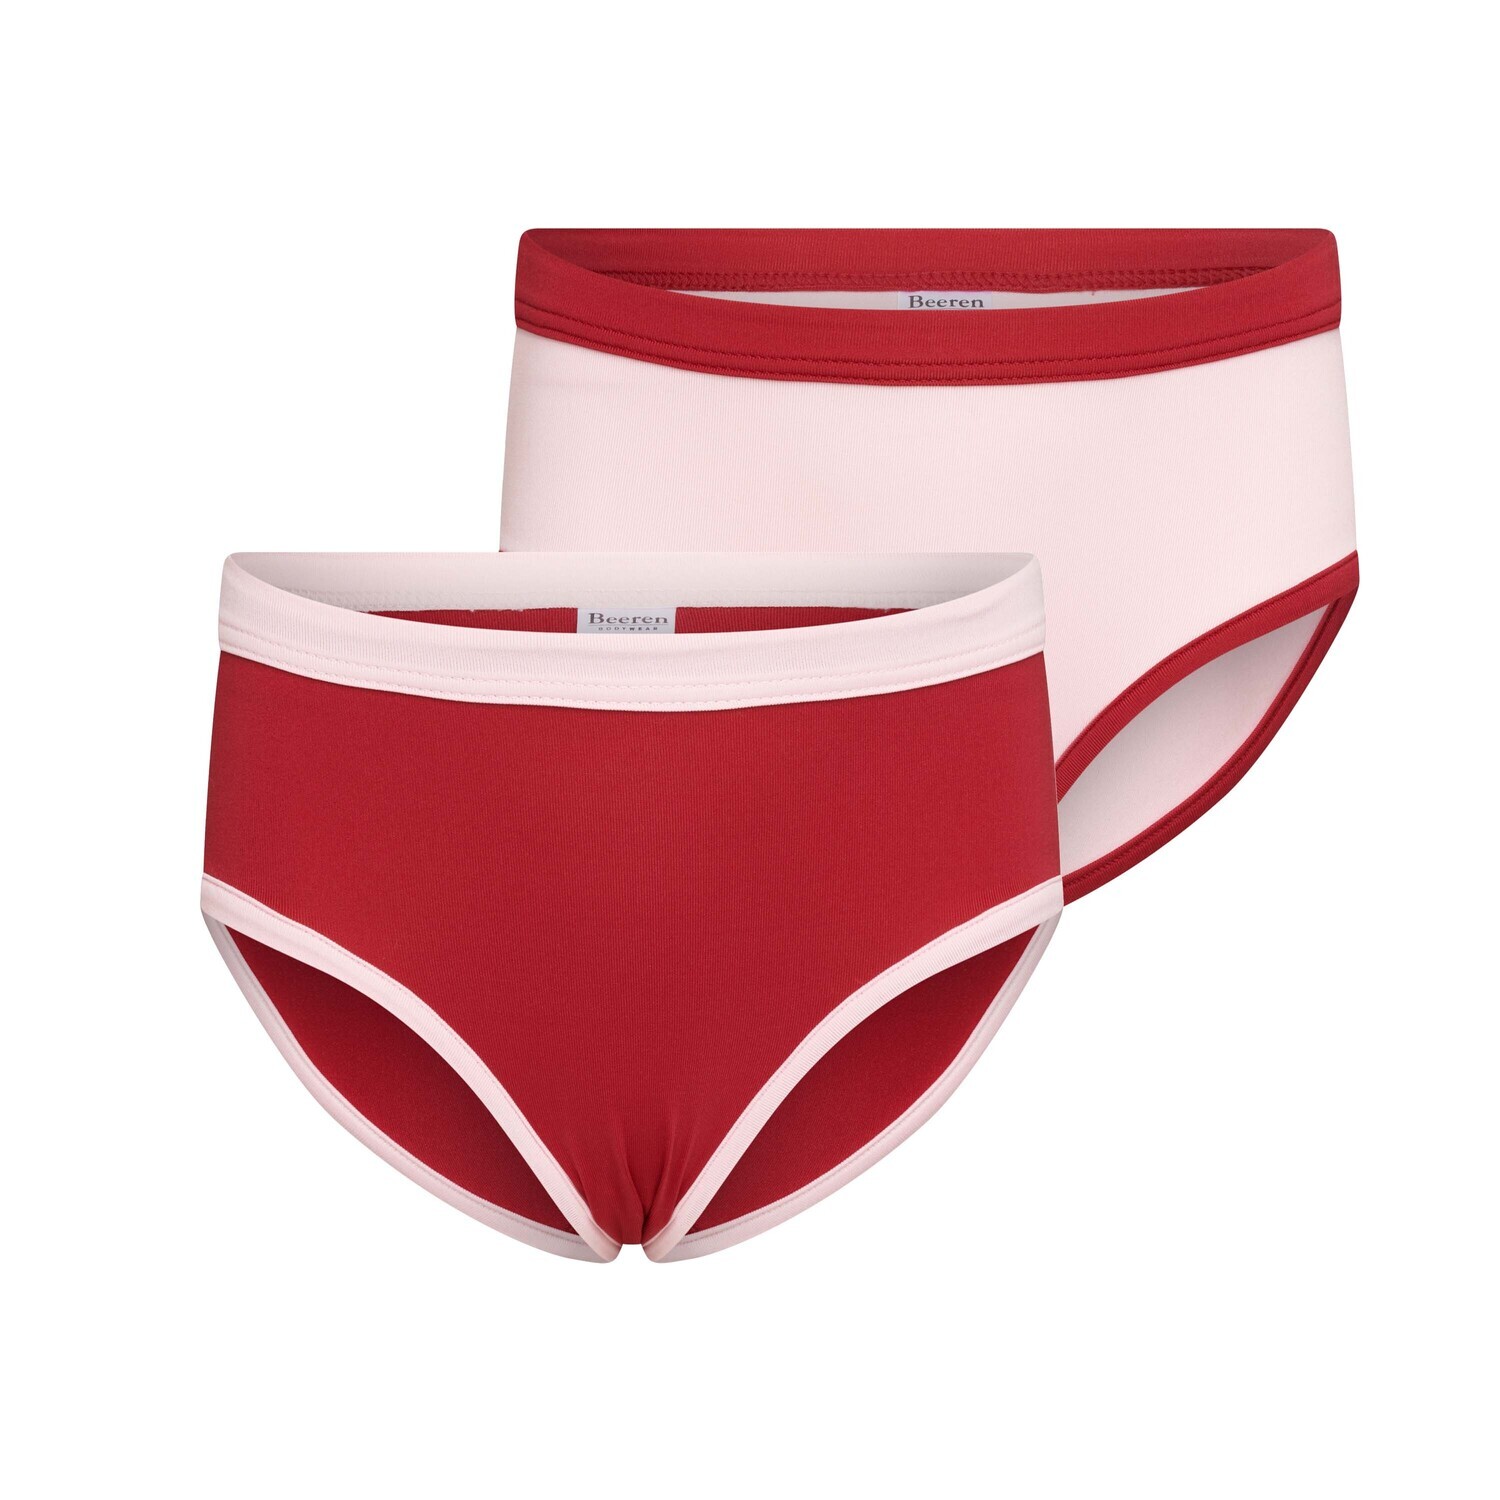 (03-233) Meisjes slip Mix and Match 2-Pack rose/rood 134/140